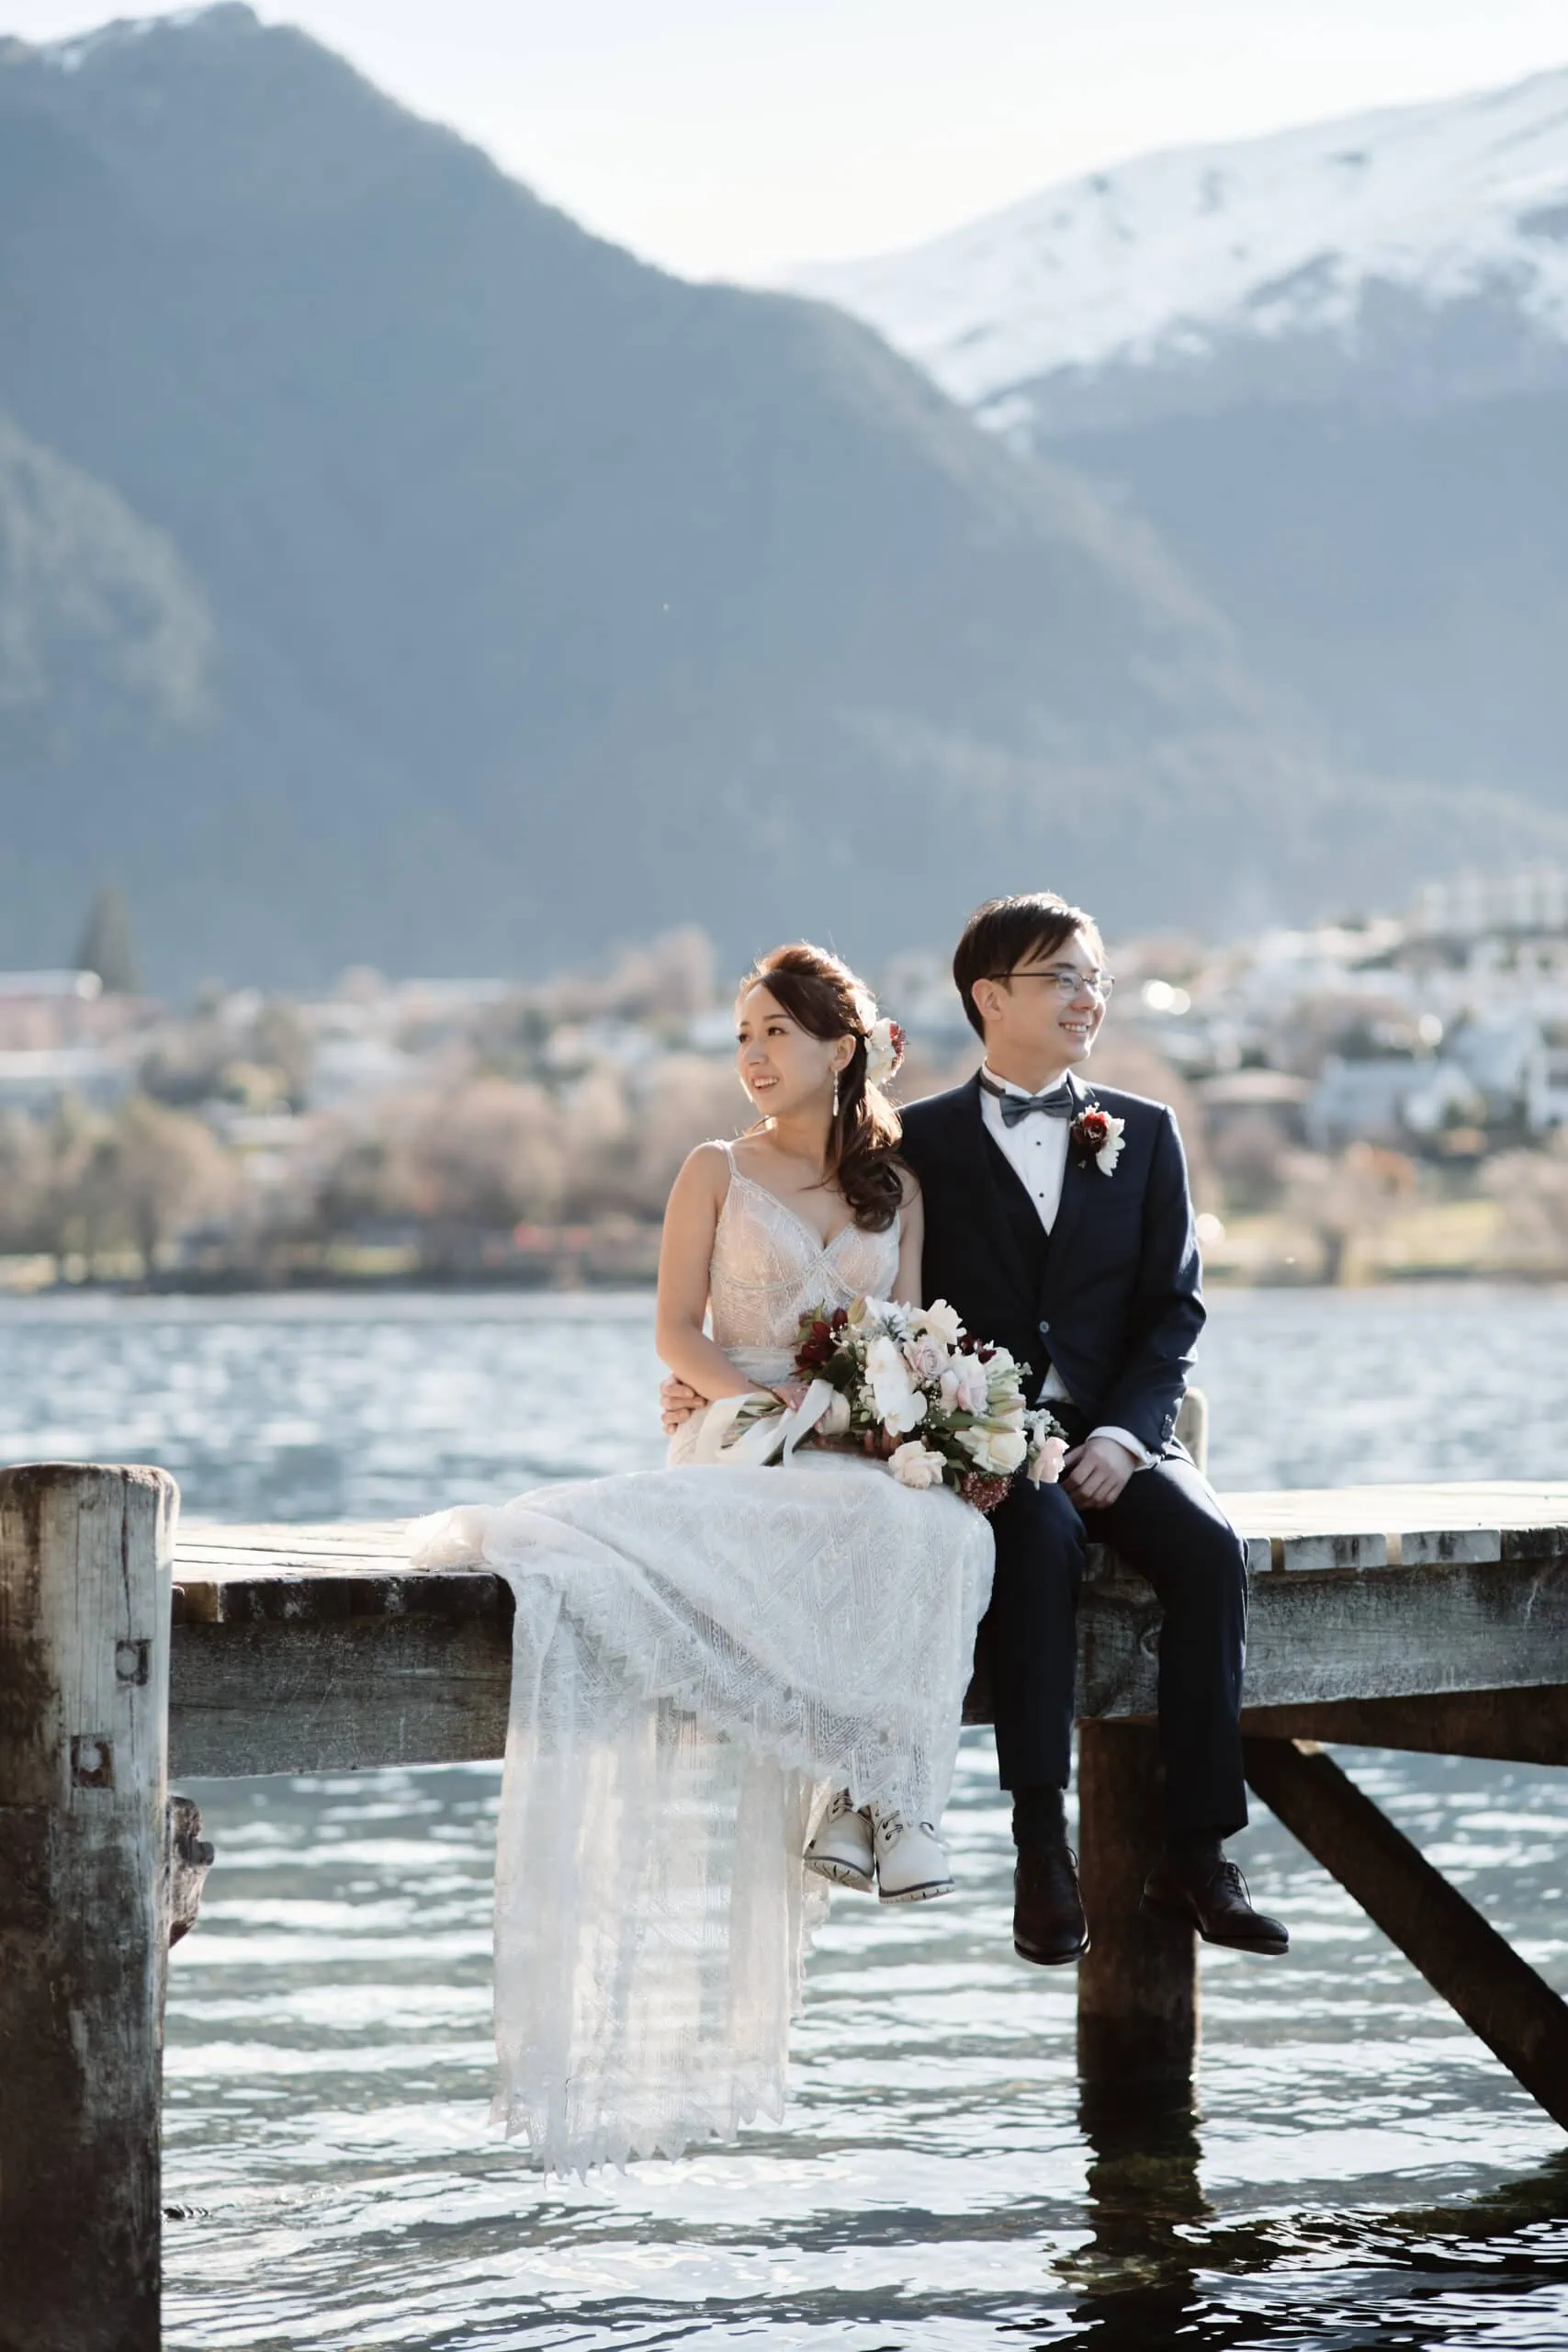 A couple sitting on a dock with mountains in the background for Stephanie & Carven's Heli Pre Wedding Elopement at The Remarkables.